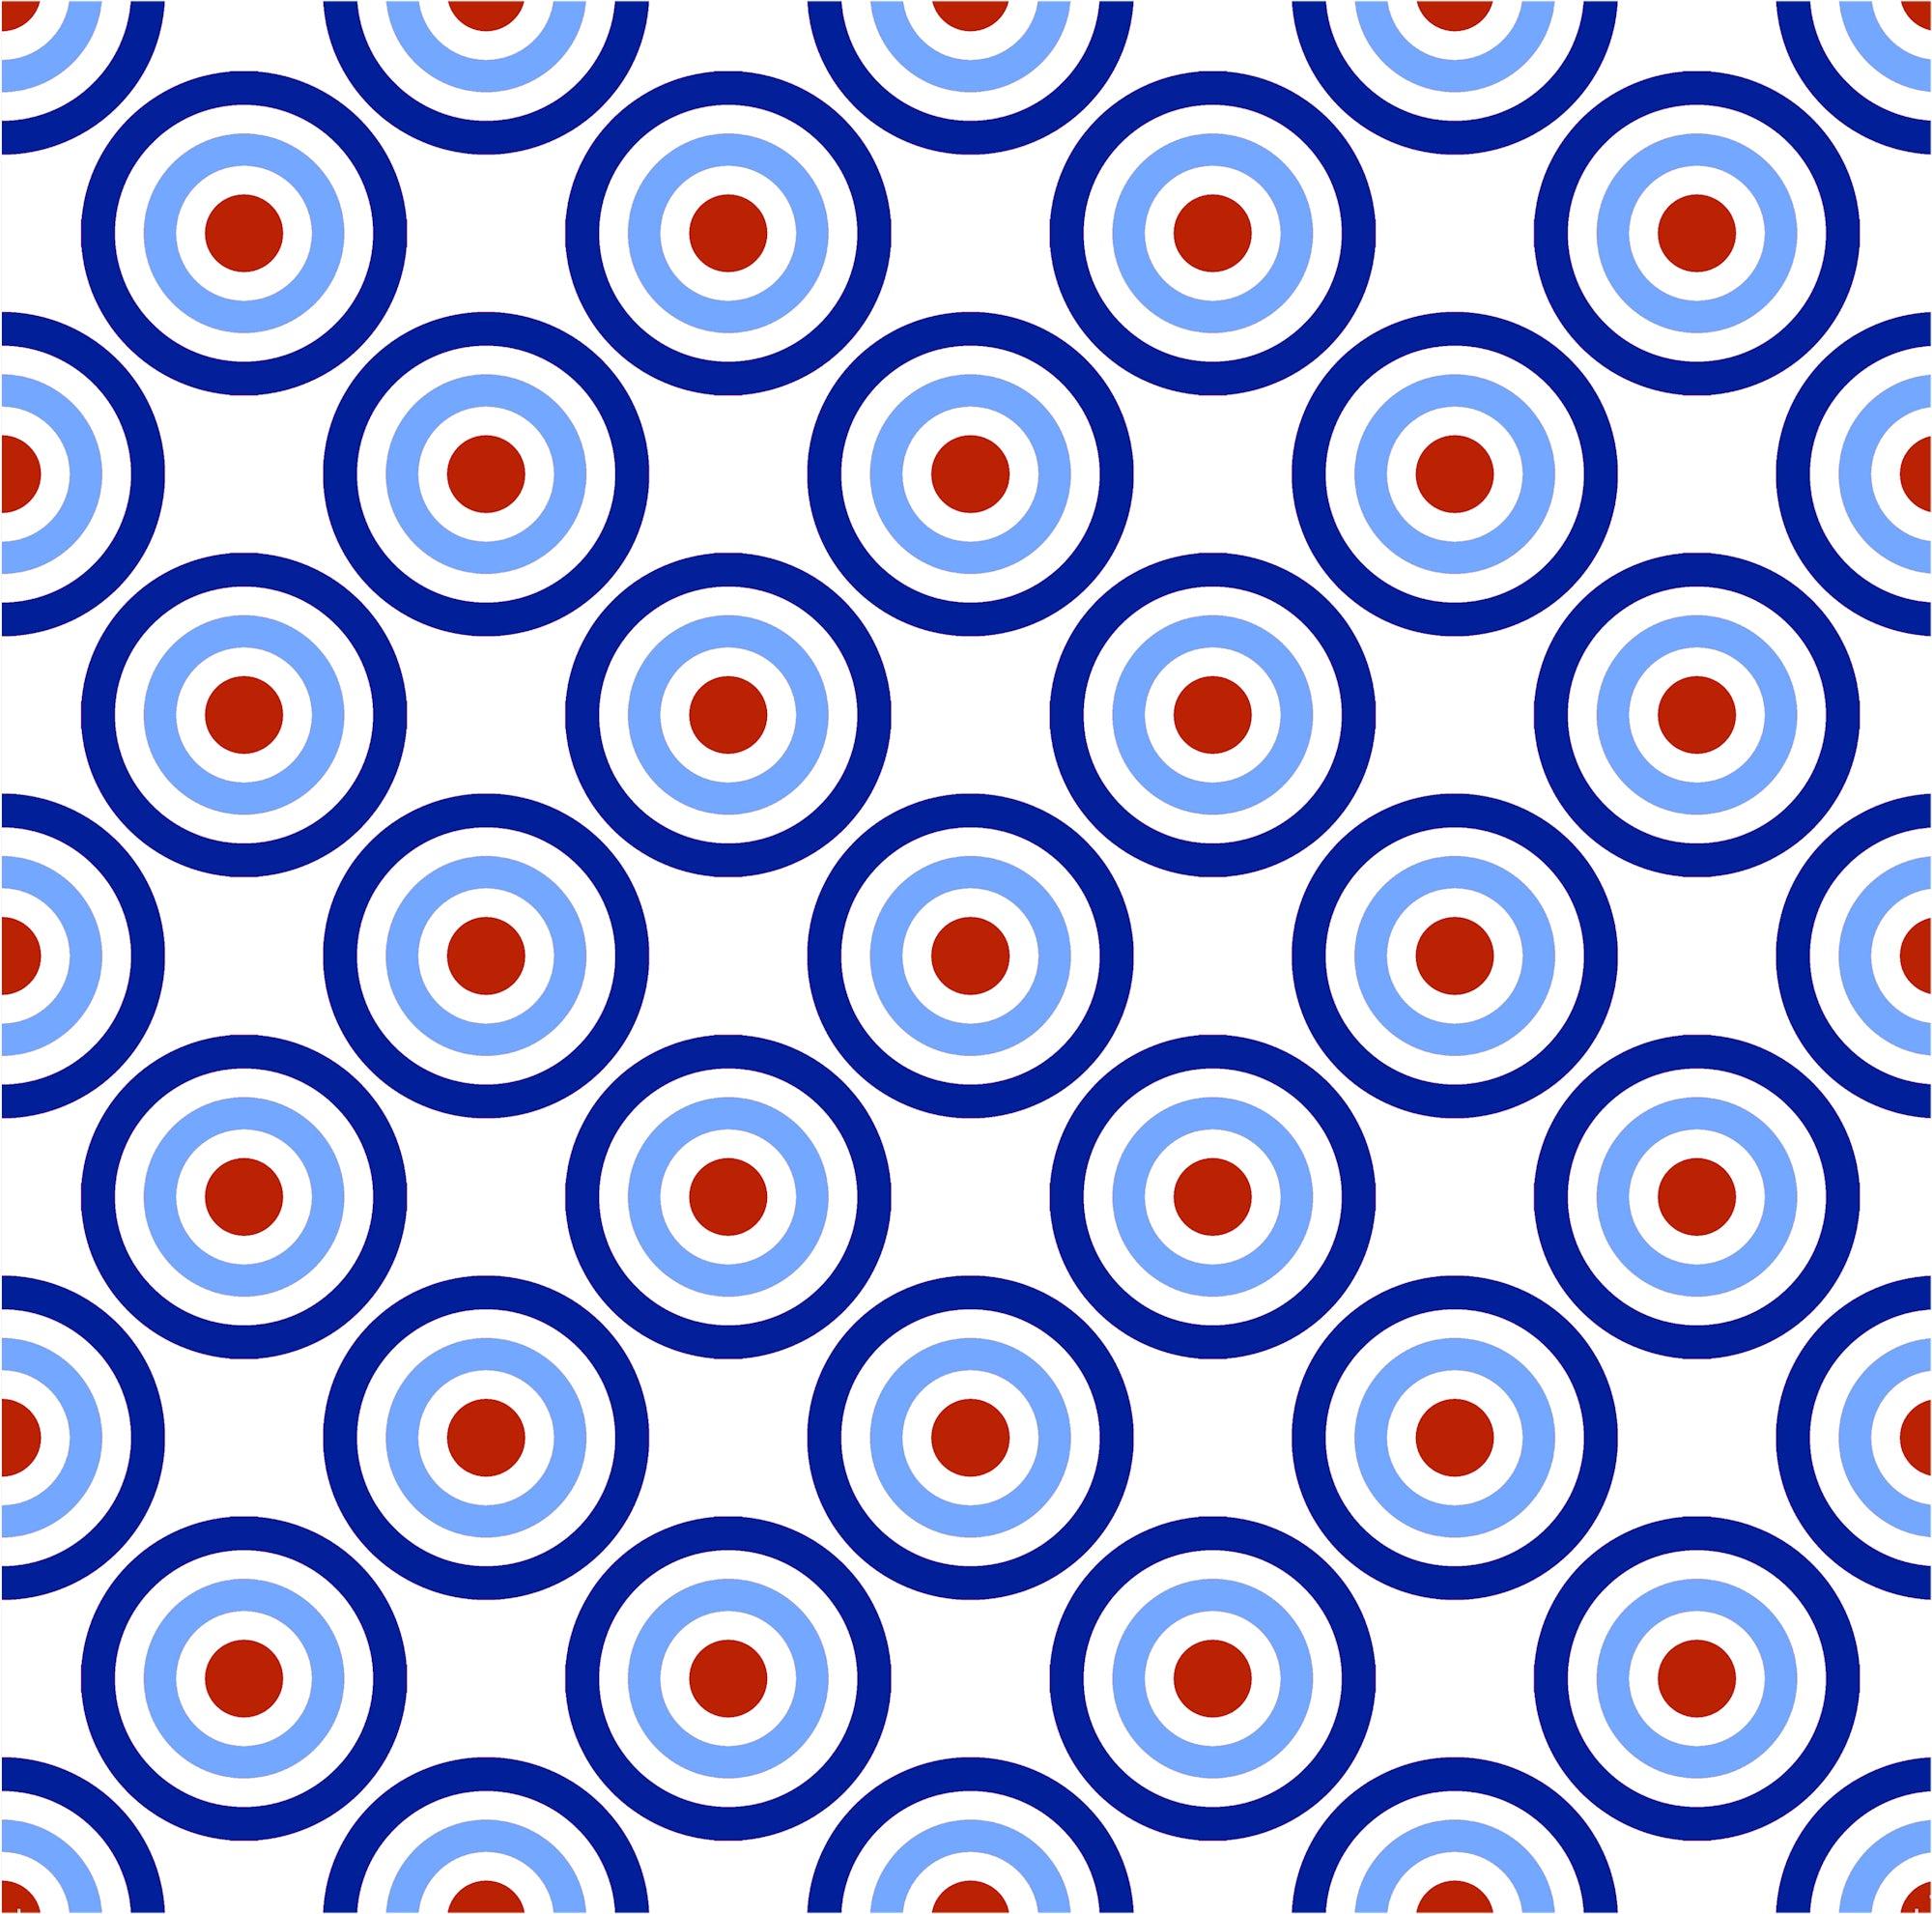 Axe Throwing Collection Bullseye 12 x 12 Double-Sided Scrapbook Paper by SSC Designs - Scrapbook Supply Companies